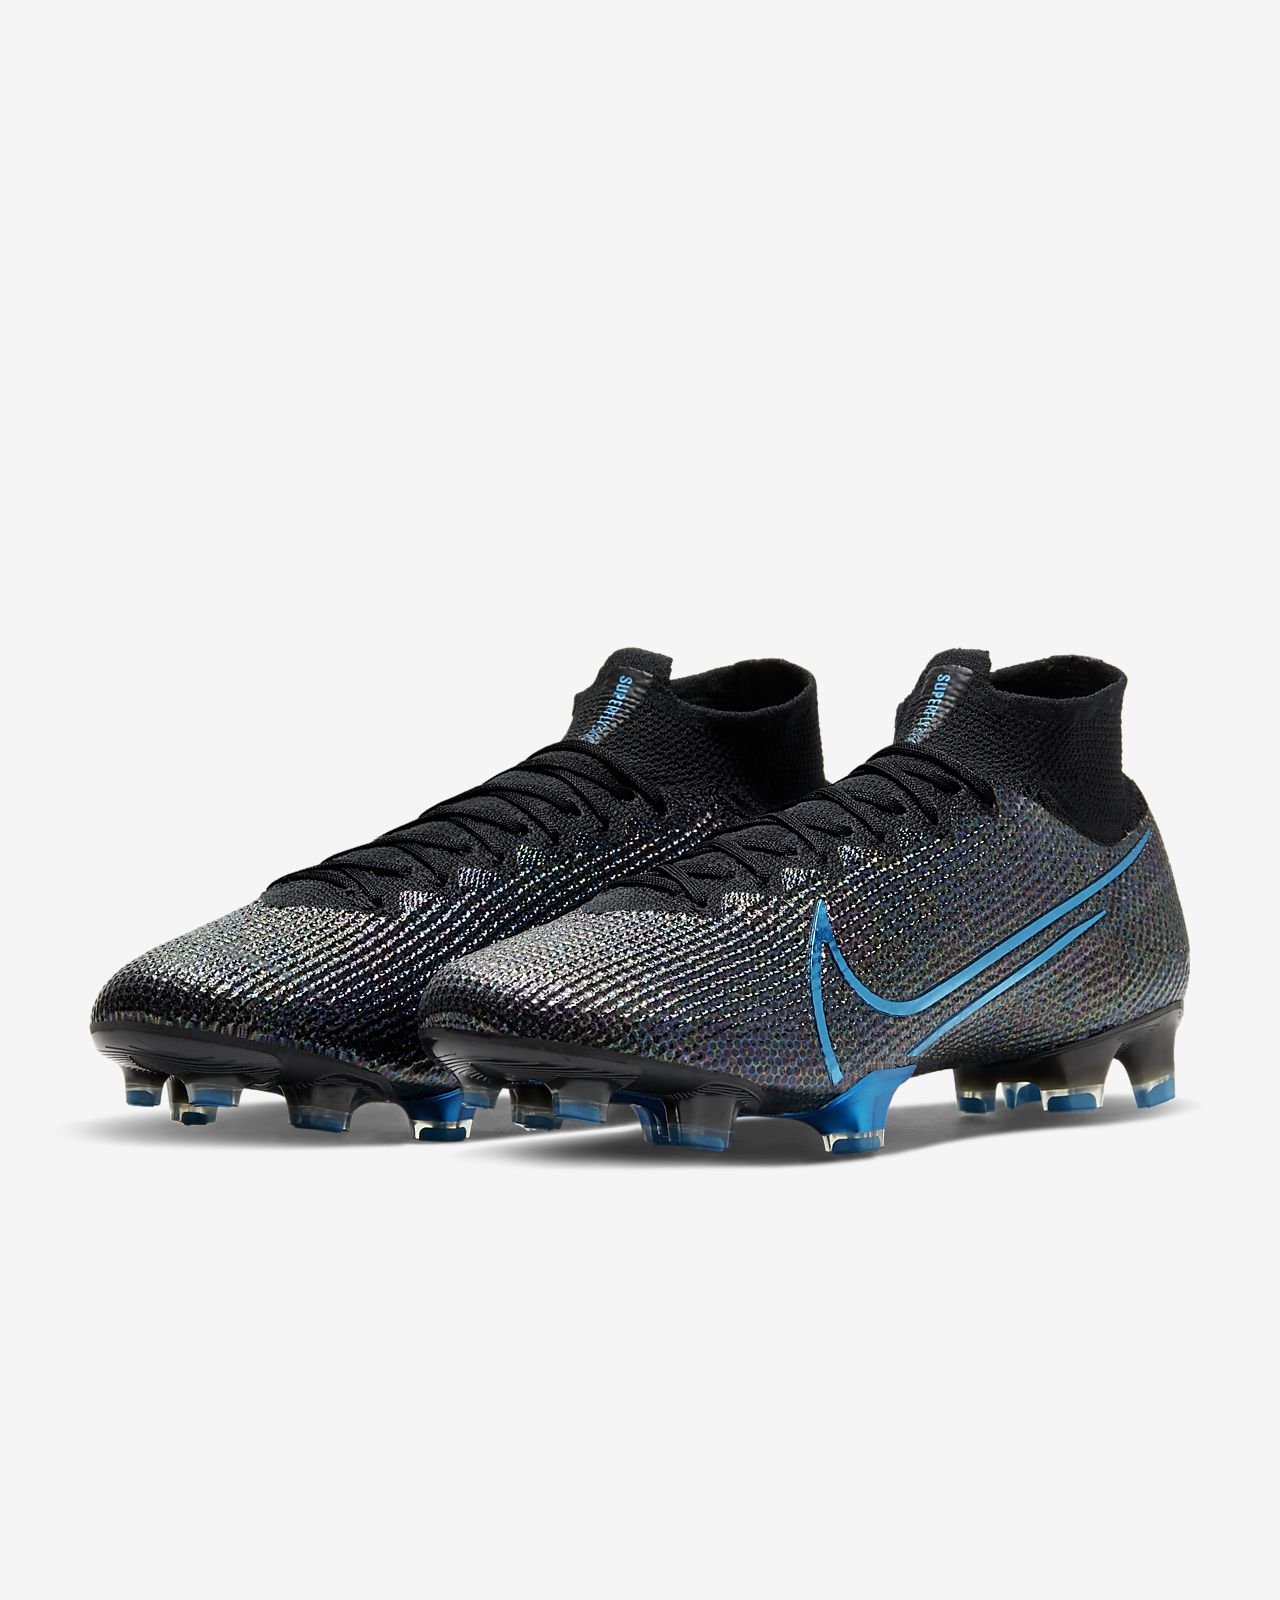 Nike Mercurial Superfly 7 Pro New Lights Pack. Spears Services